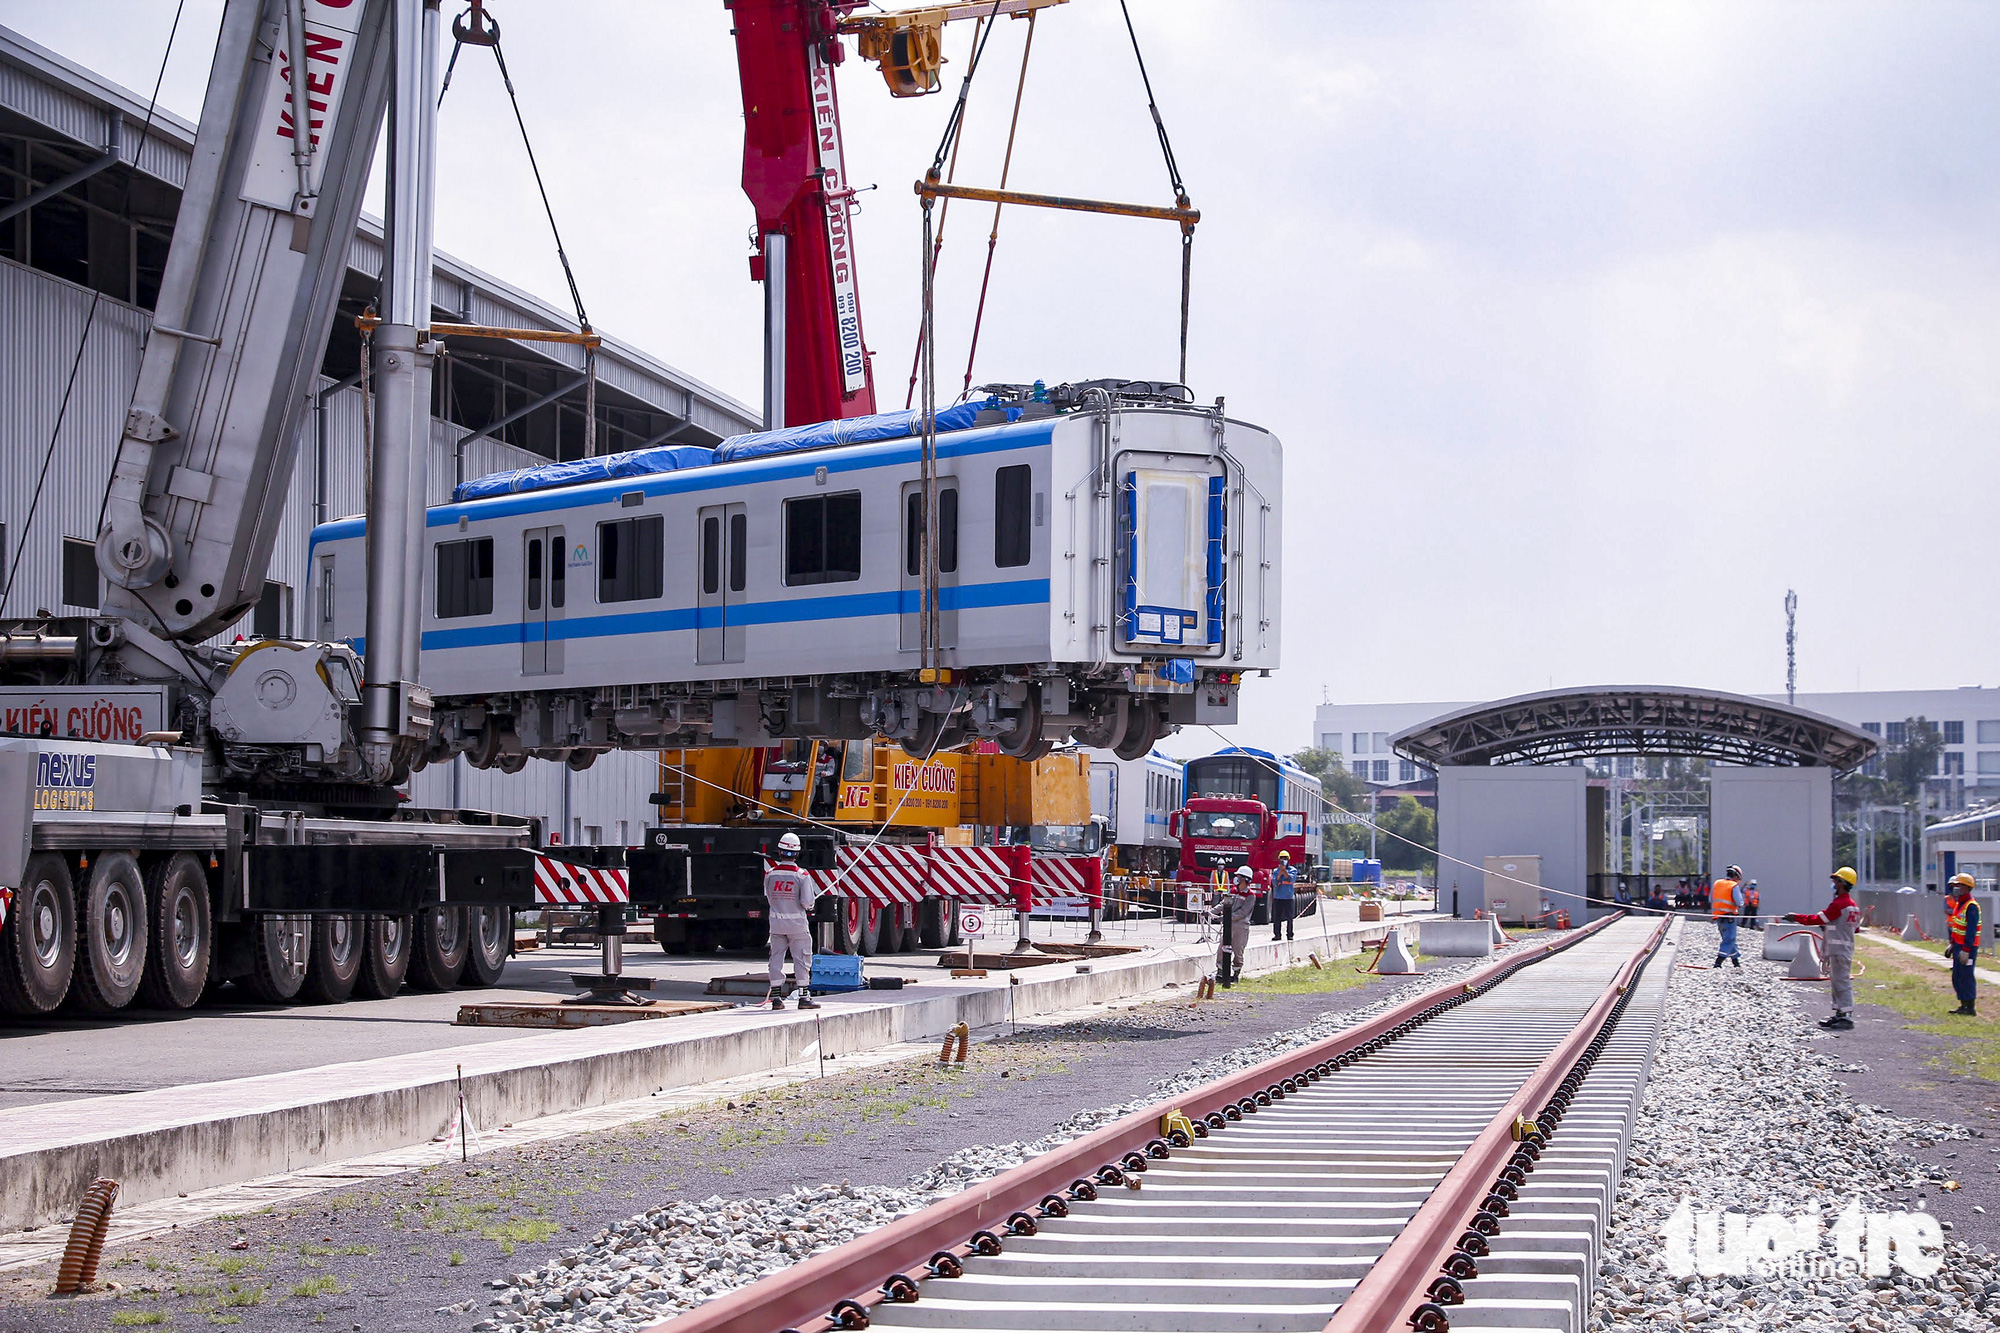 Engineers work near a railcar of the metro line No. 1 at Long Binh Depot in Thu Duc City, Ho Chi Minh City. Photo: Chau Tuan / Tuoi Tre